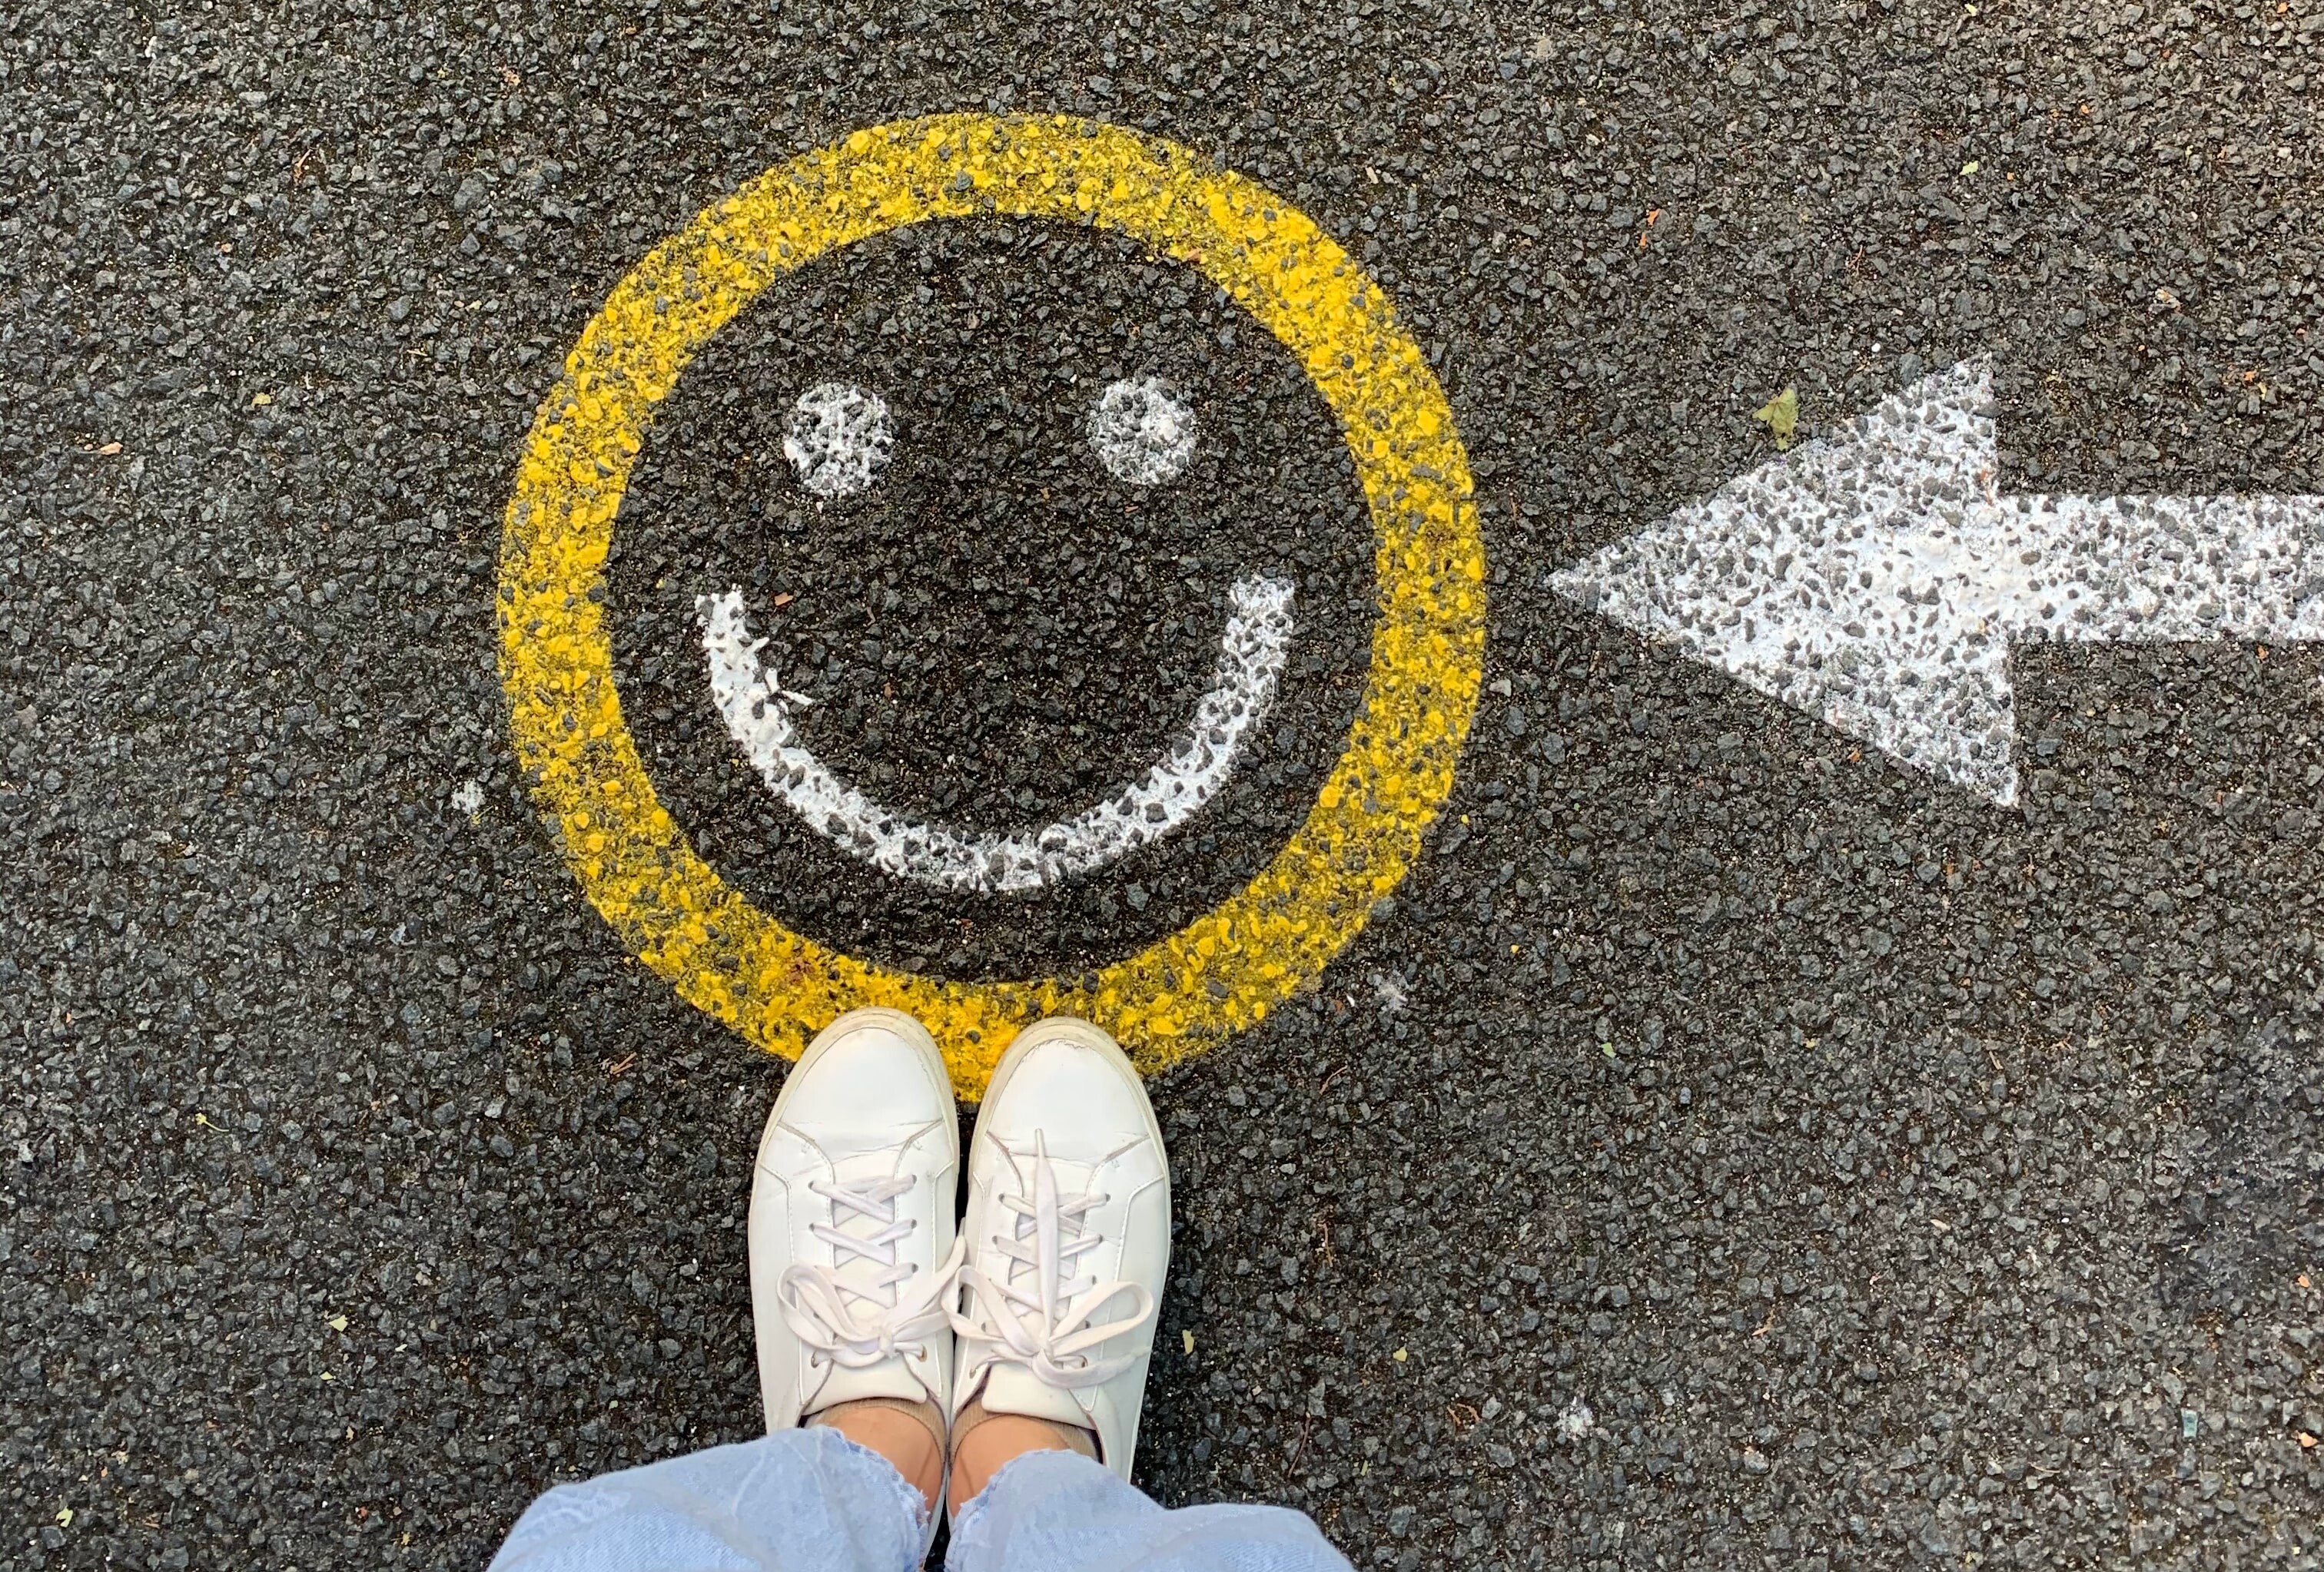 smiley face painted on the road